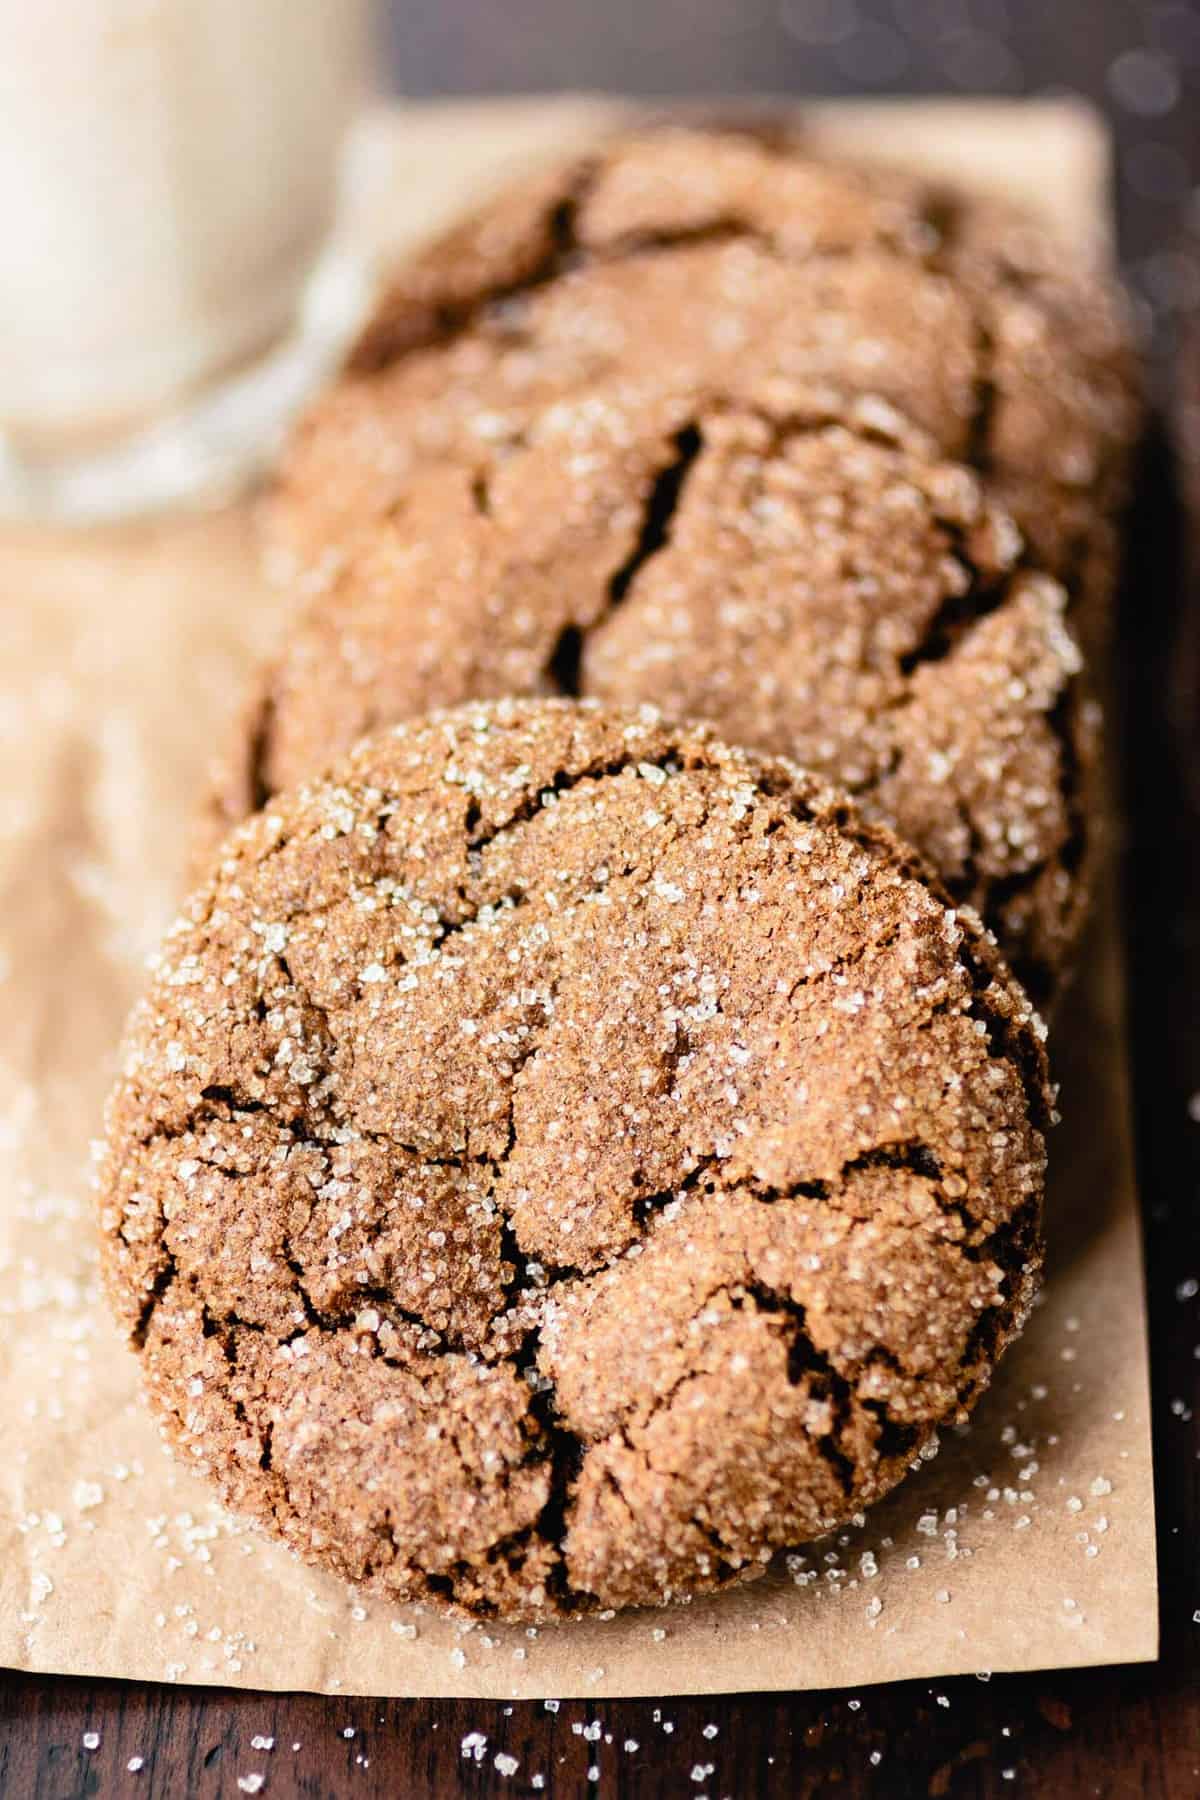 A close-up shot of a gluten-free ginger molasses cookie shows the pillowy top and sugar crusted crinkles